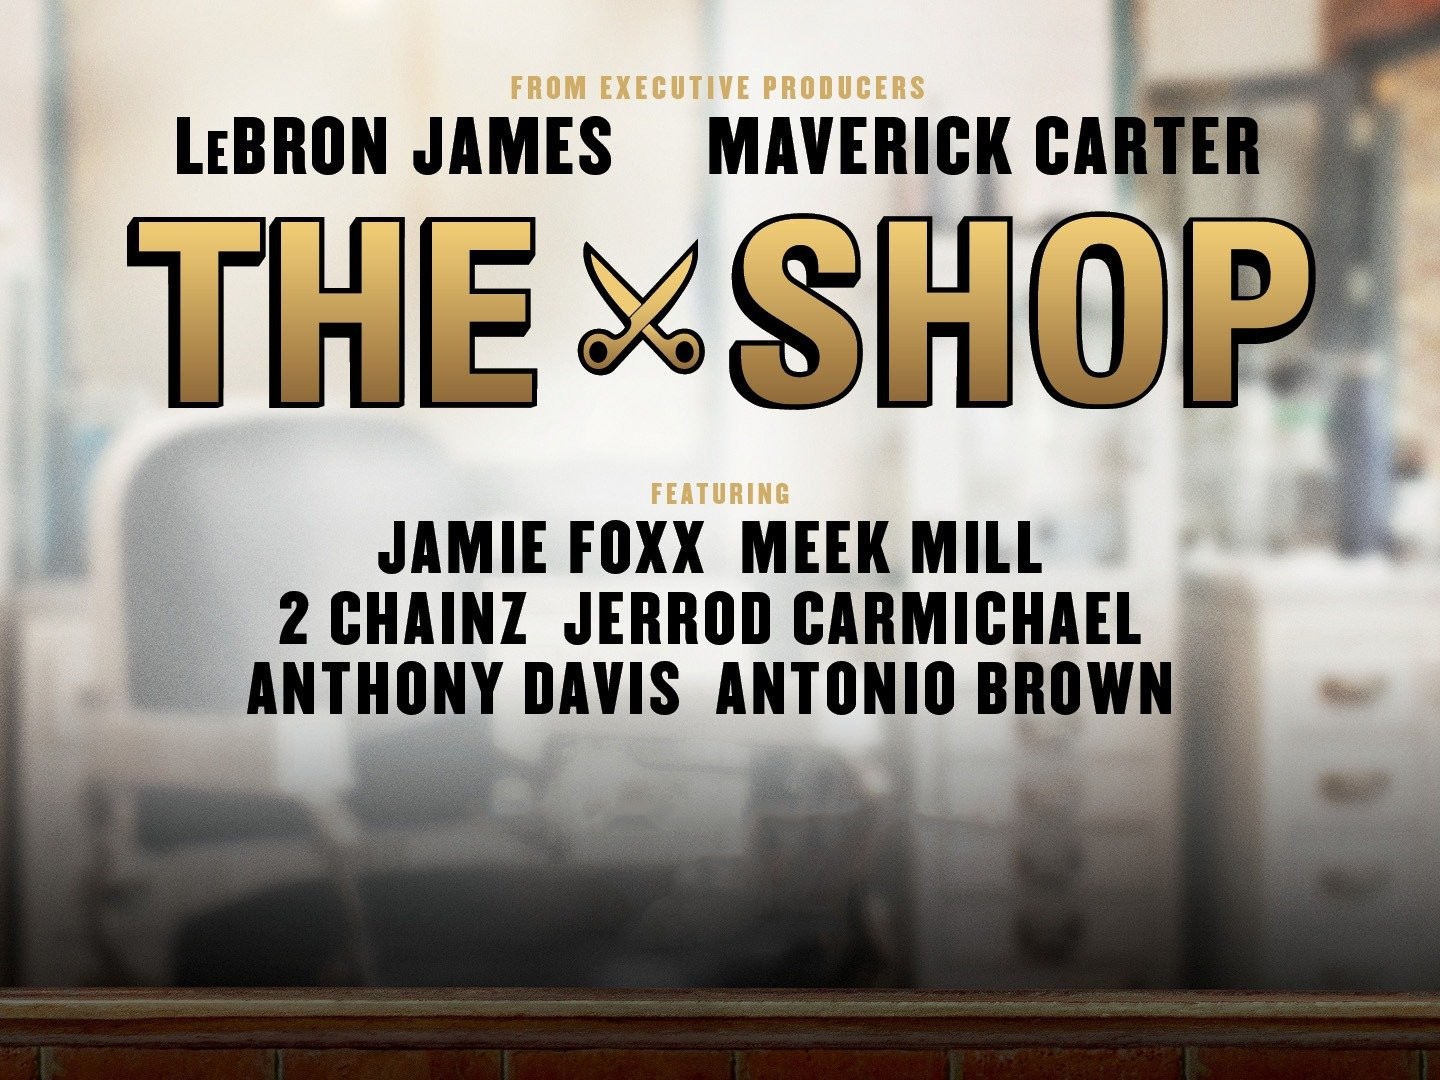 LeBron James, HBO Partner for Unscripted Series 'The Shop